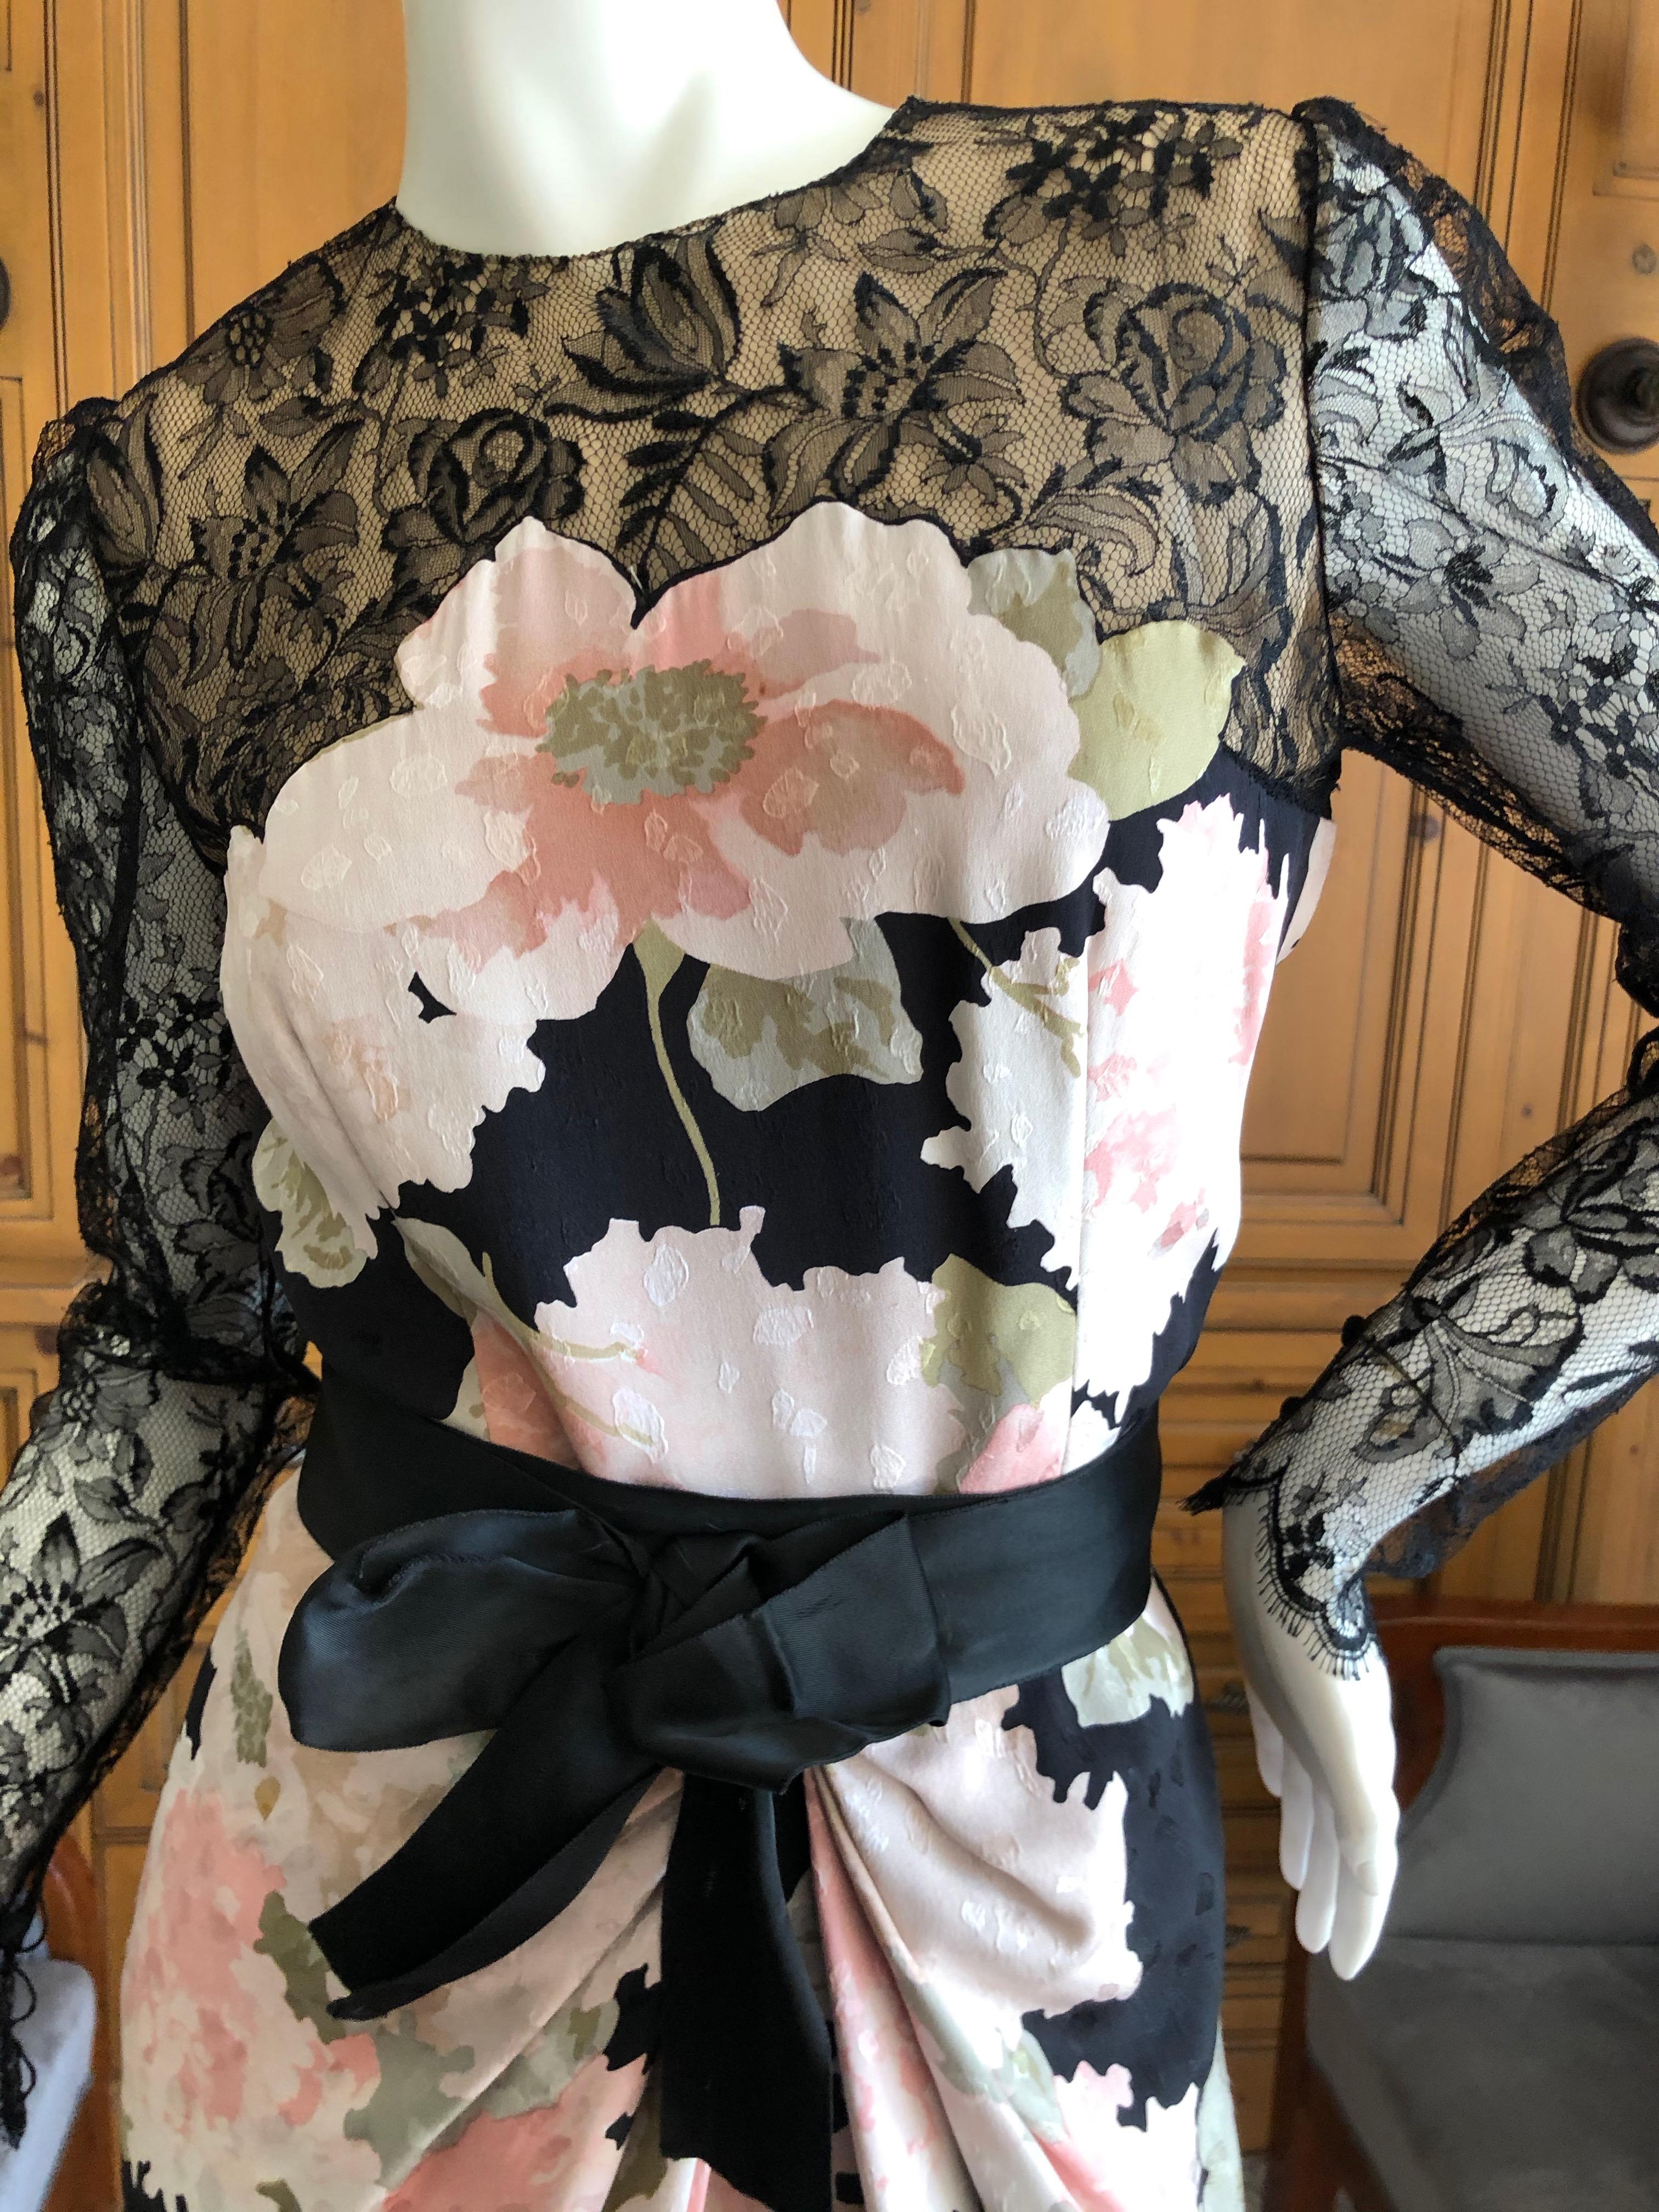 Bill Blass 1980's Silk Floral Dress with Scallop Lace and Bow Silk Belt In Excellent Condition For Sale In Cloverdale, CA